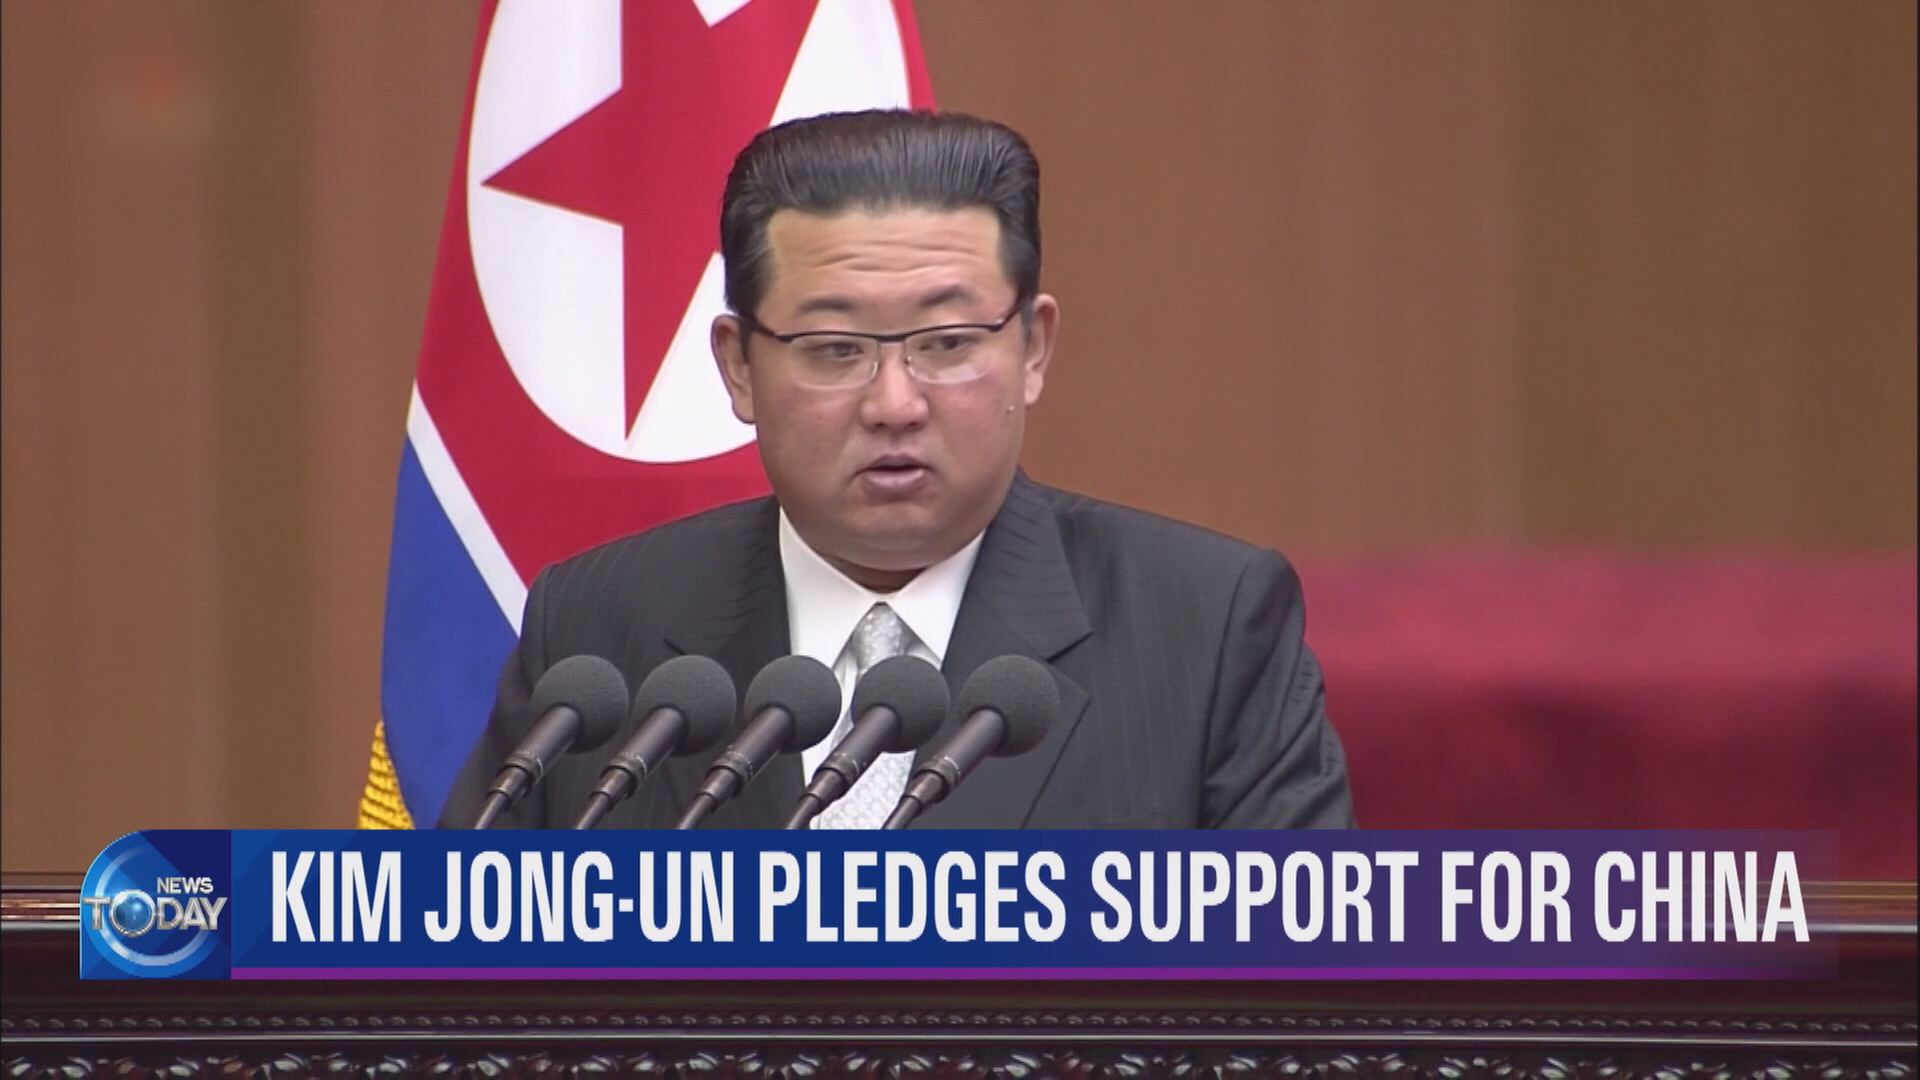 KIM JONG-UN PLEDGES SUPPORT FOR CHINA